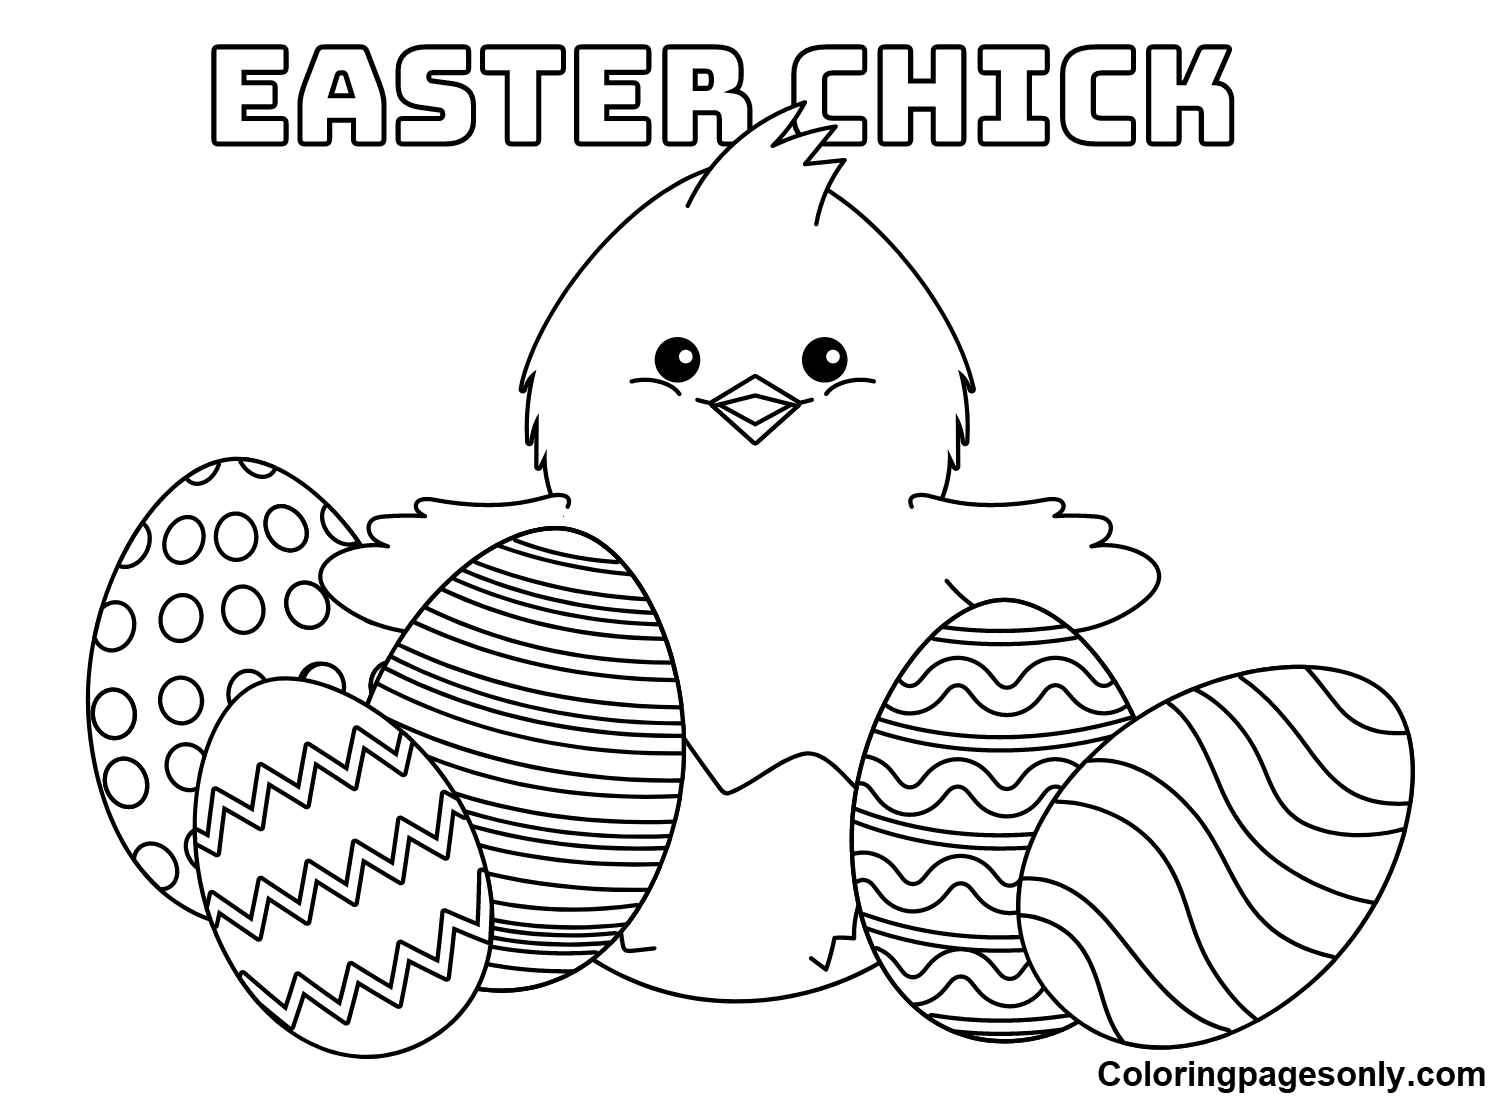 Easter Chick Pictures Coloring Pages